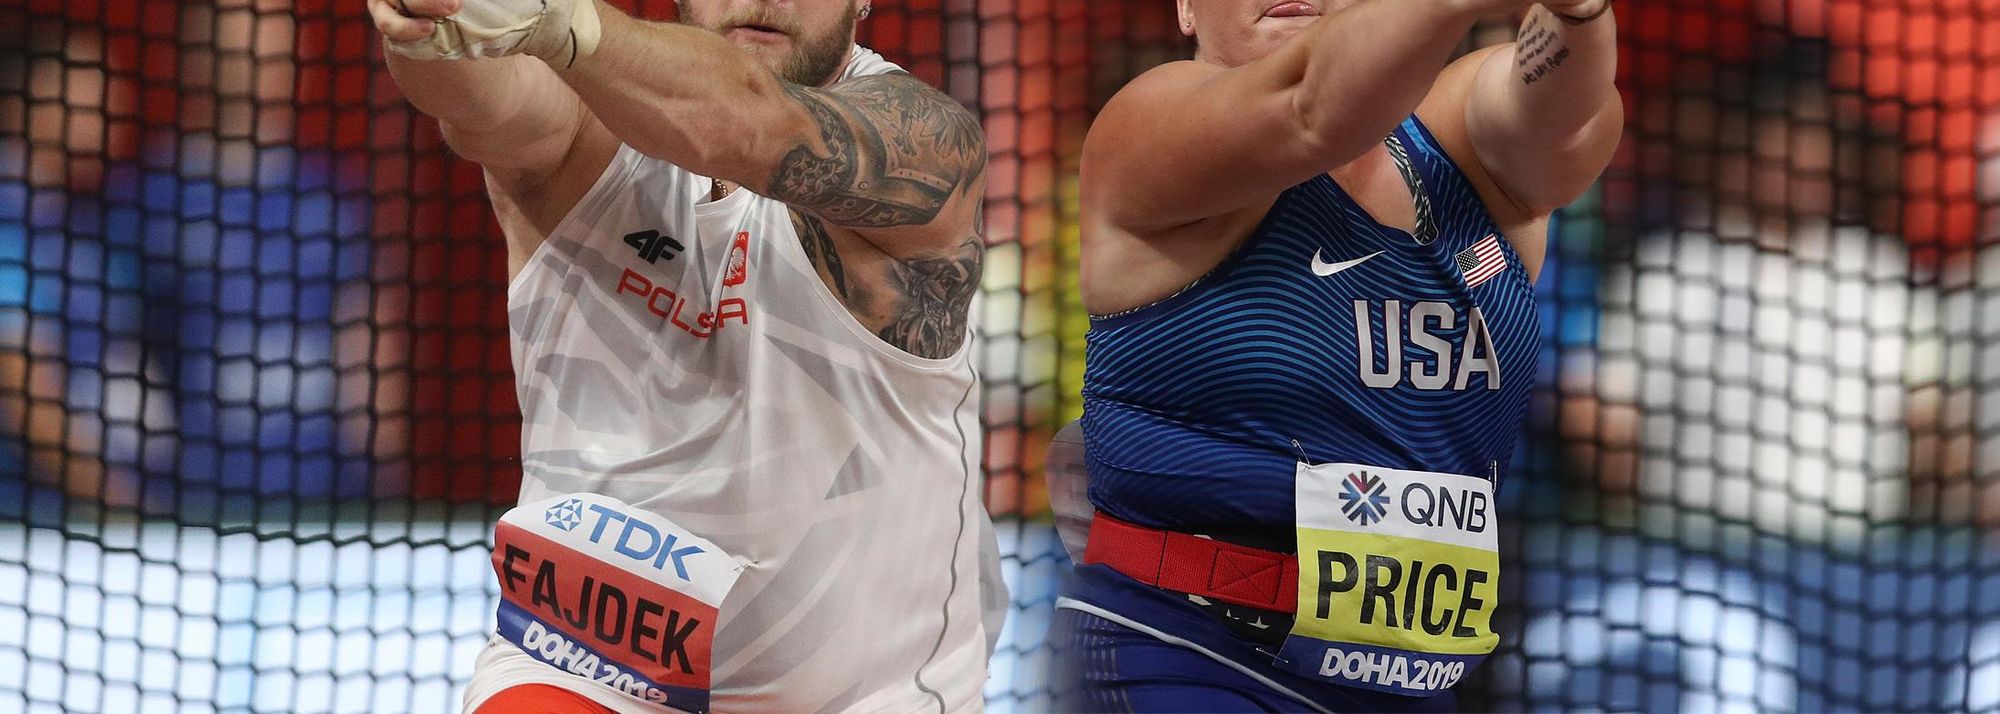 Recently crowned world champions Pawel Fajdek of Poland and DeAnna Price of the USA topped the end-of-year standings for the 2019 IAAF Hammer Throw Challenge. Fajdek won the challenge for the fifth time, adding to victories in 2013, 2015, 2016 and 2017. For Price, it was her first finish atop the standings.